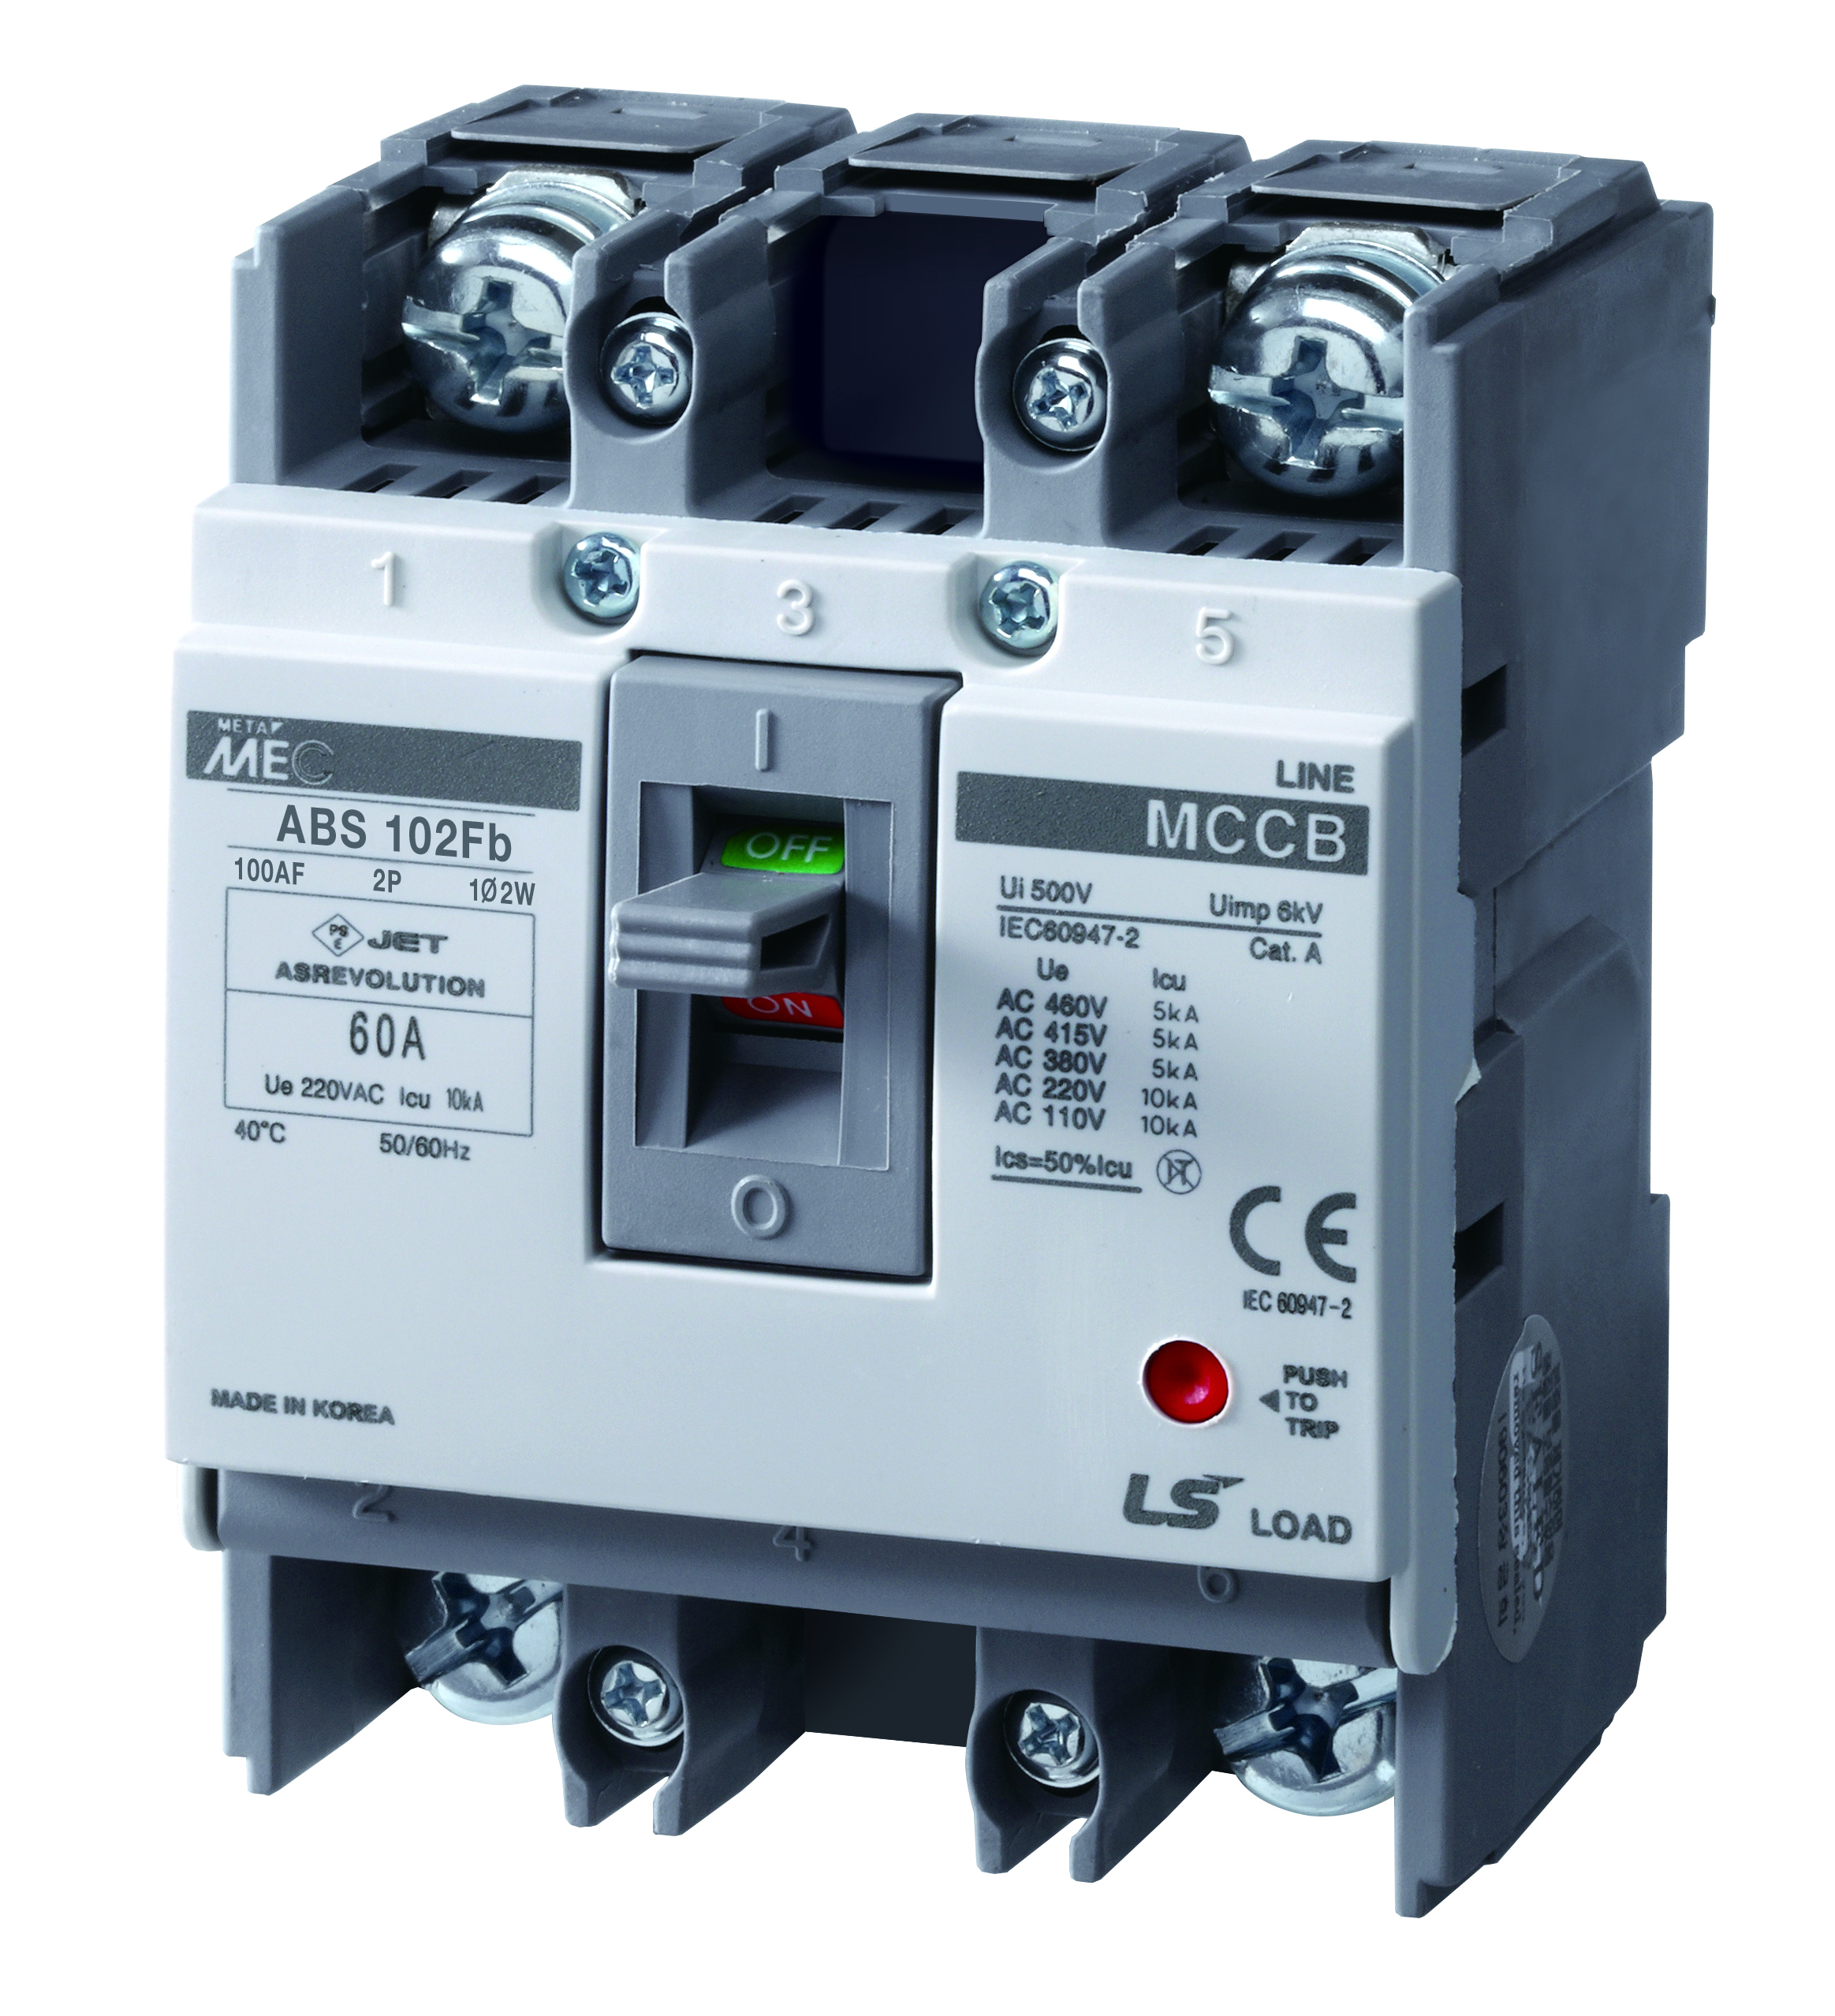 Molded Case Circuit Breakers - Fuseless, ABS Series, DIN Rail Mounting